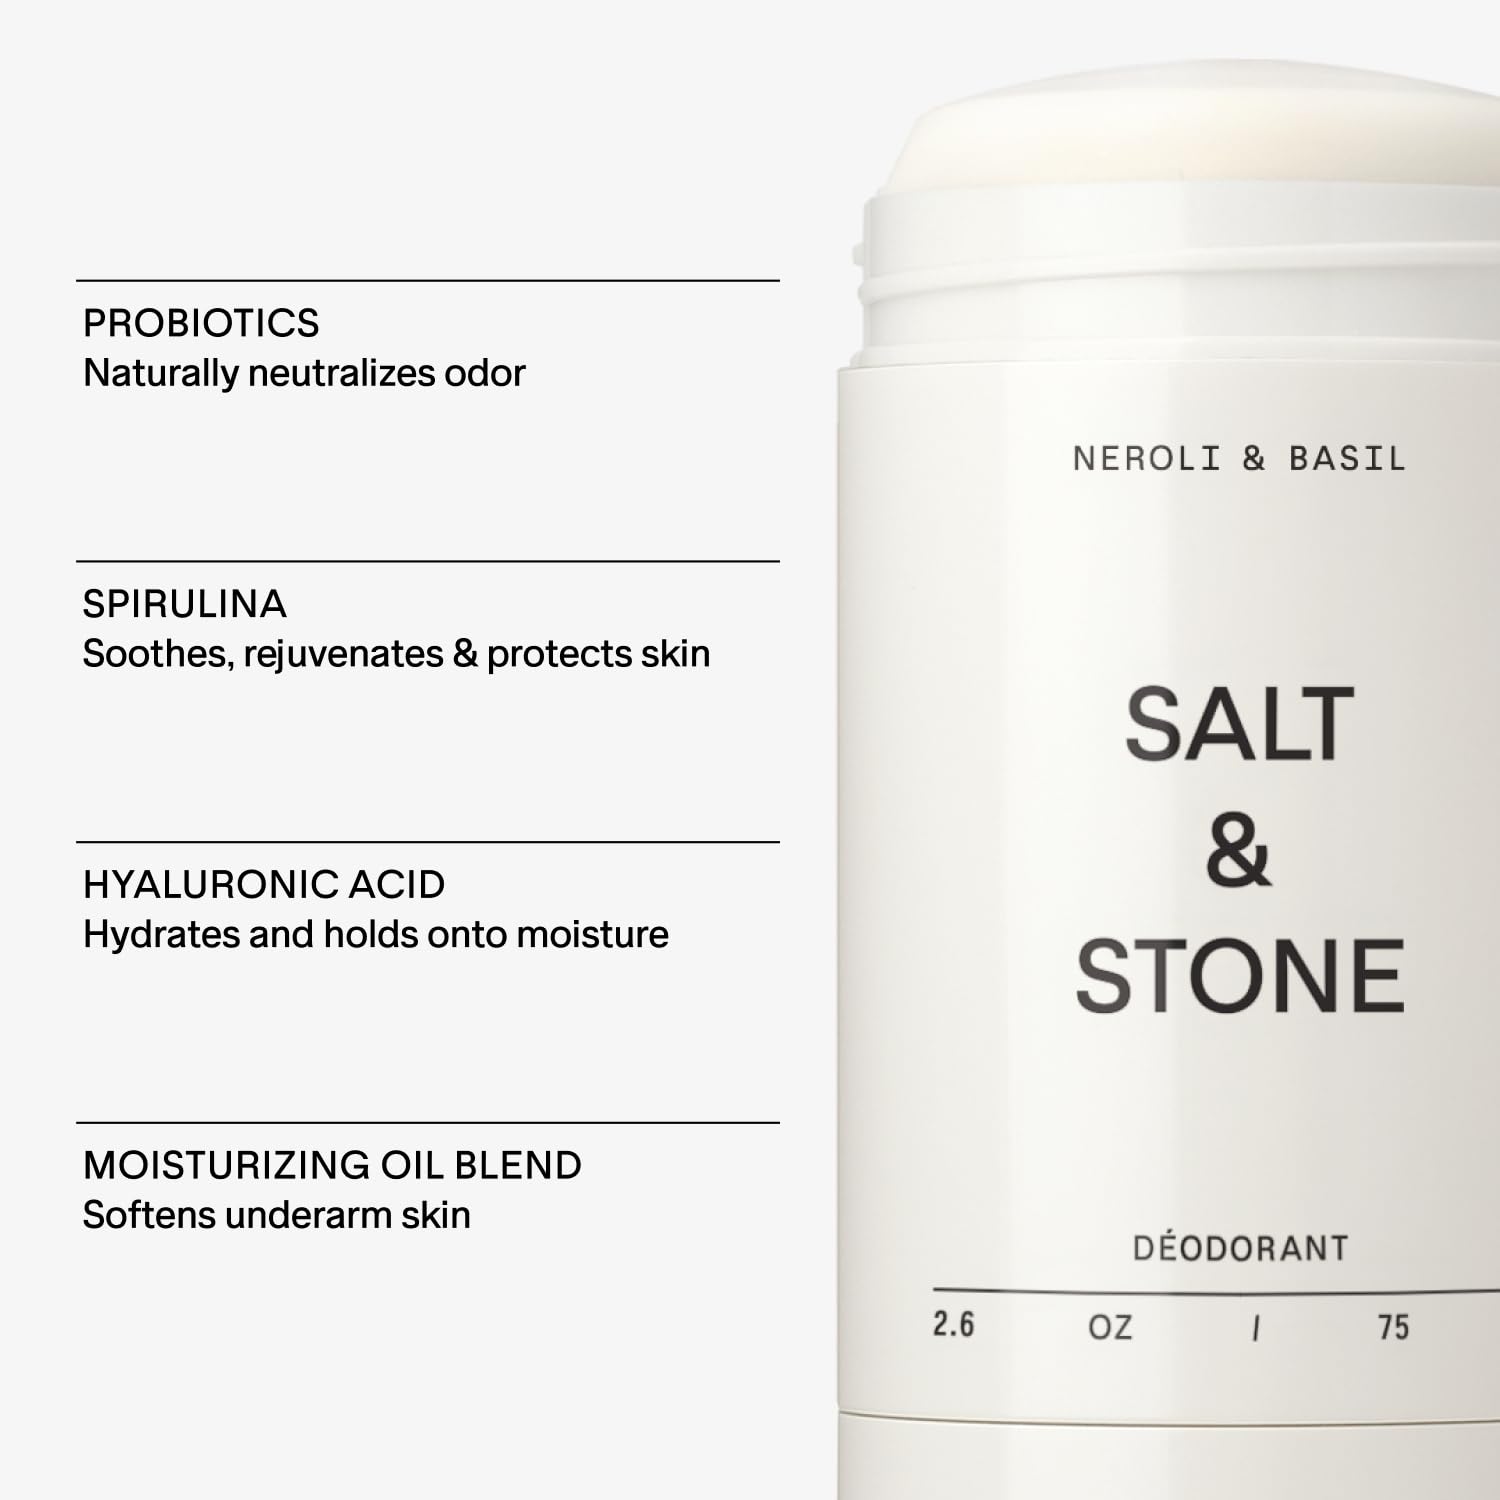 SALT & STONE Natural Deodorant - Neroli & Shiso Leaf | Extra Strength Natural Deodorant for Women & Men | Aluminum Free with Probiotics, Seaweed Extracts & Shea Butter (2.6 oz) : Beauty & Personal Care